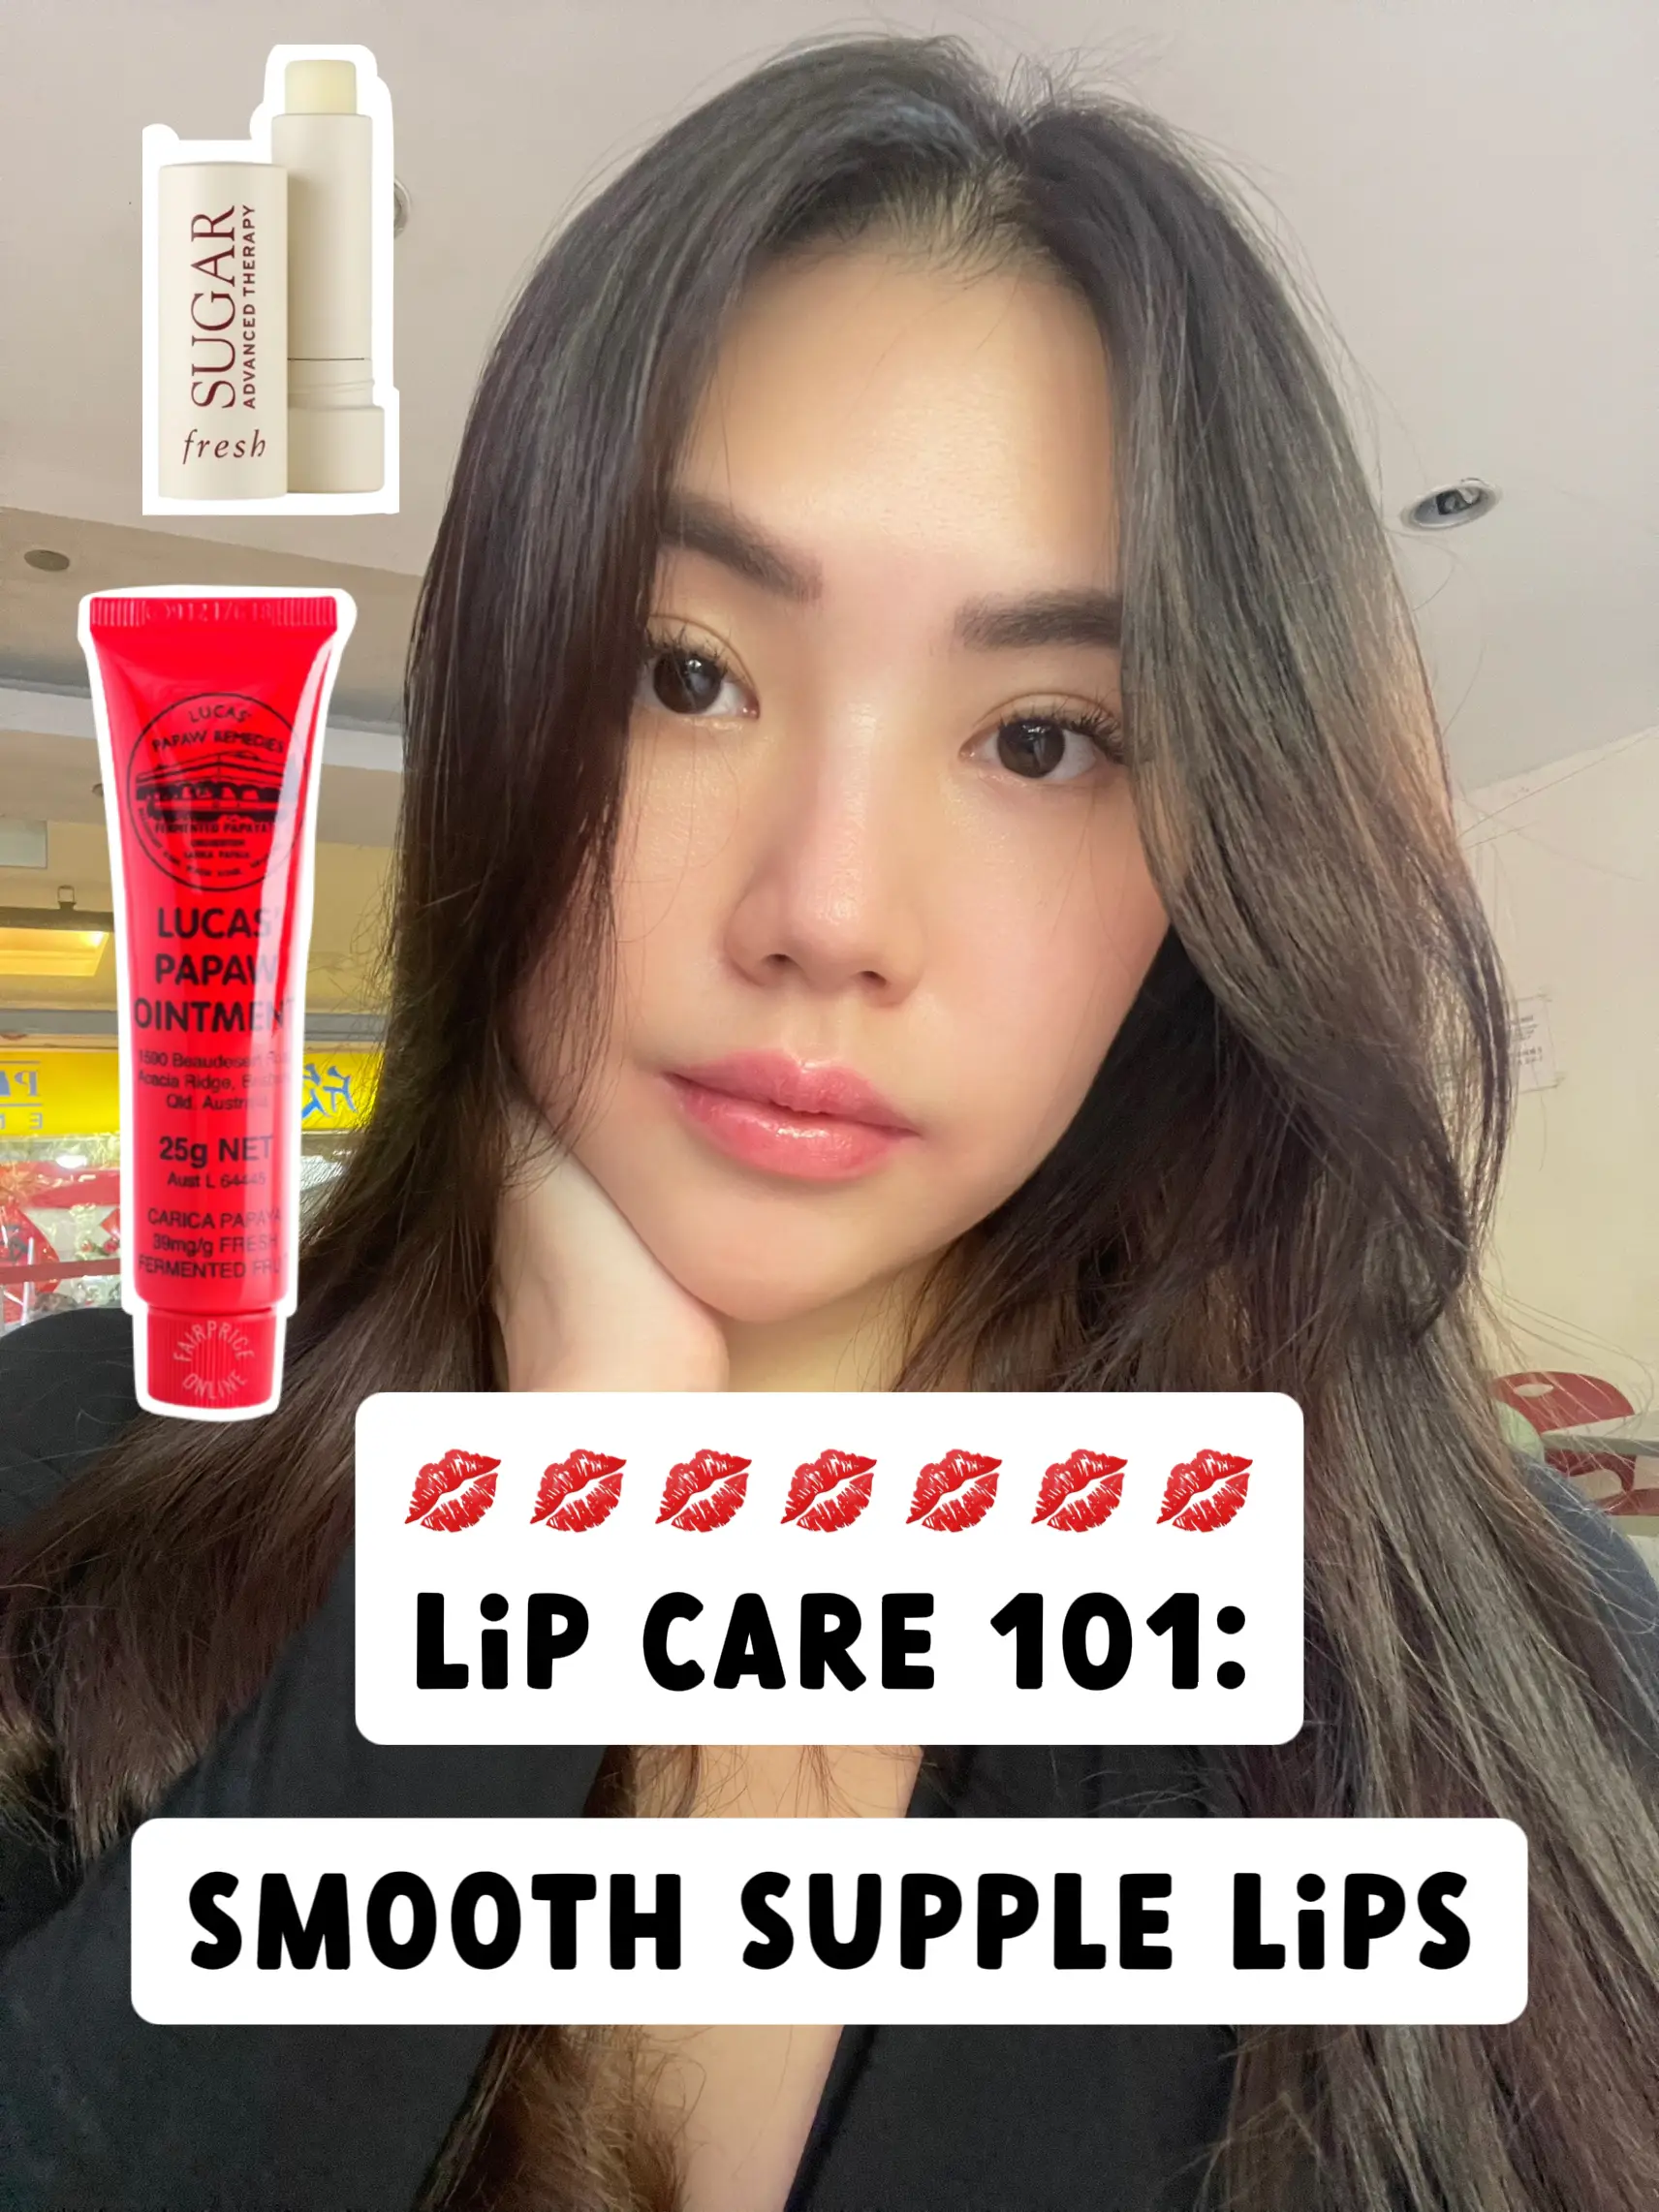 Why We Love Lucas Papaw Ointment for Eczema and Chapped Lips